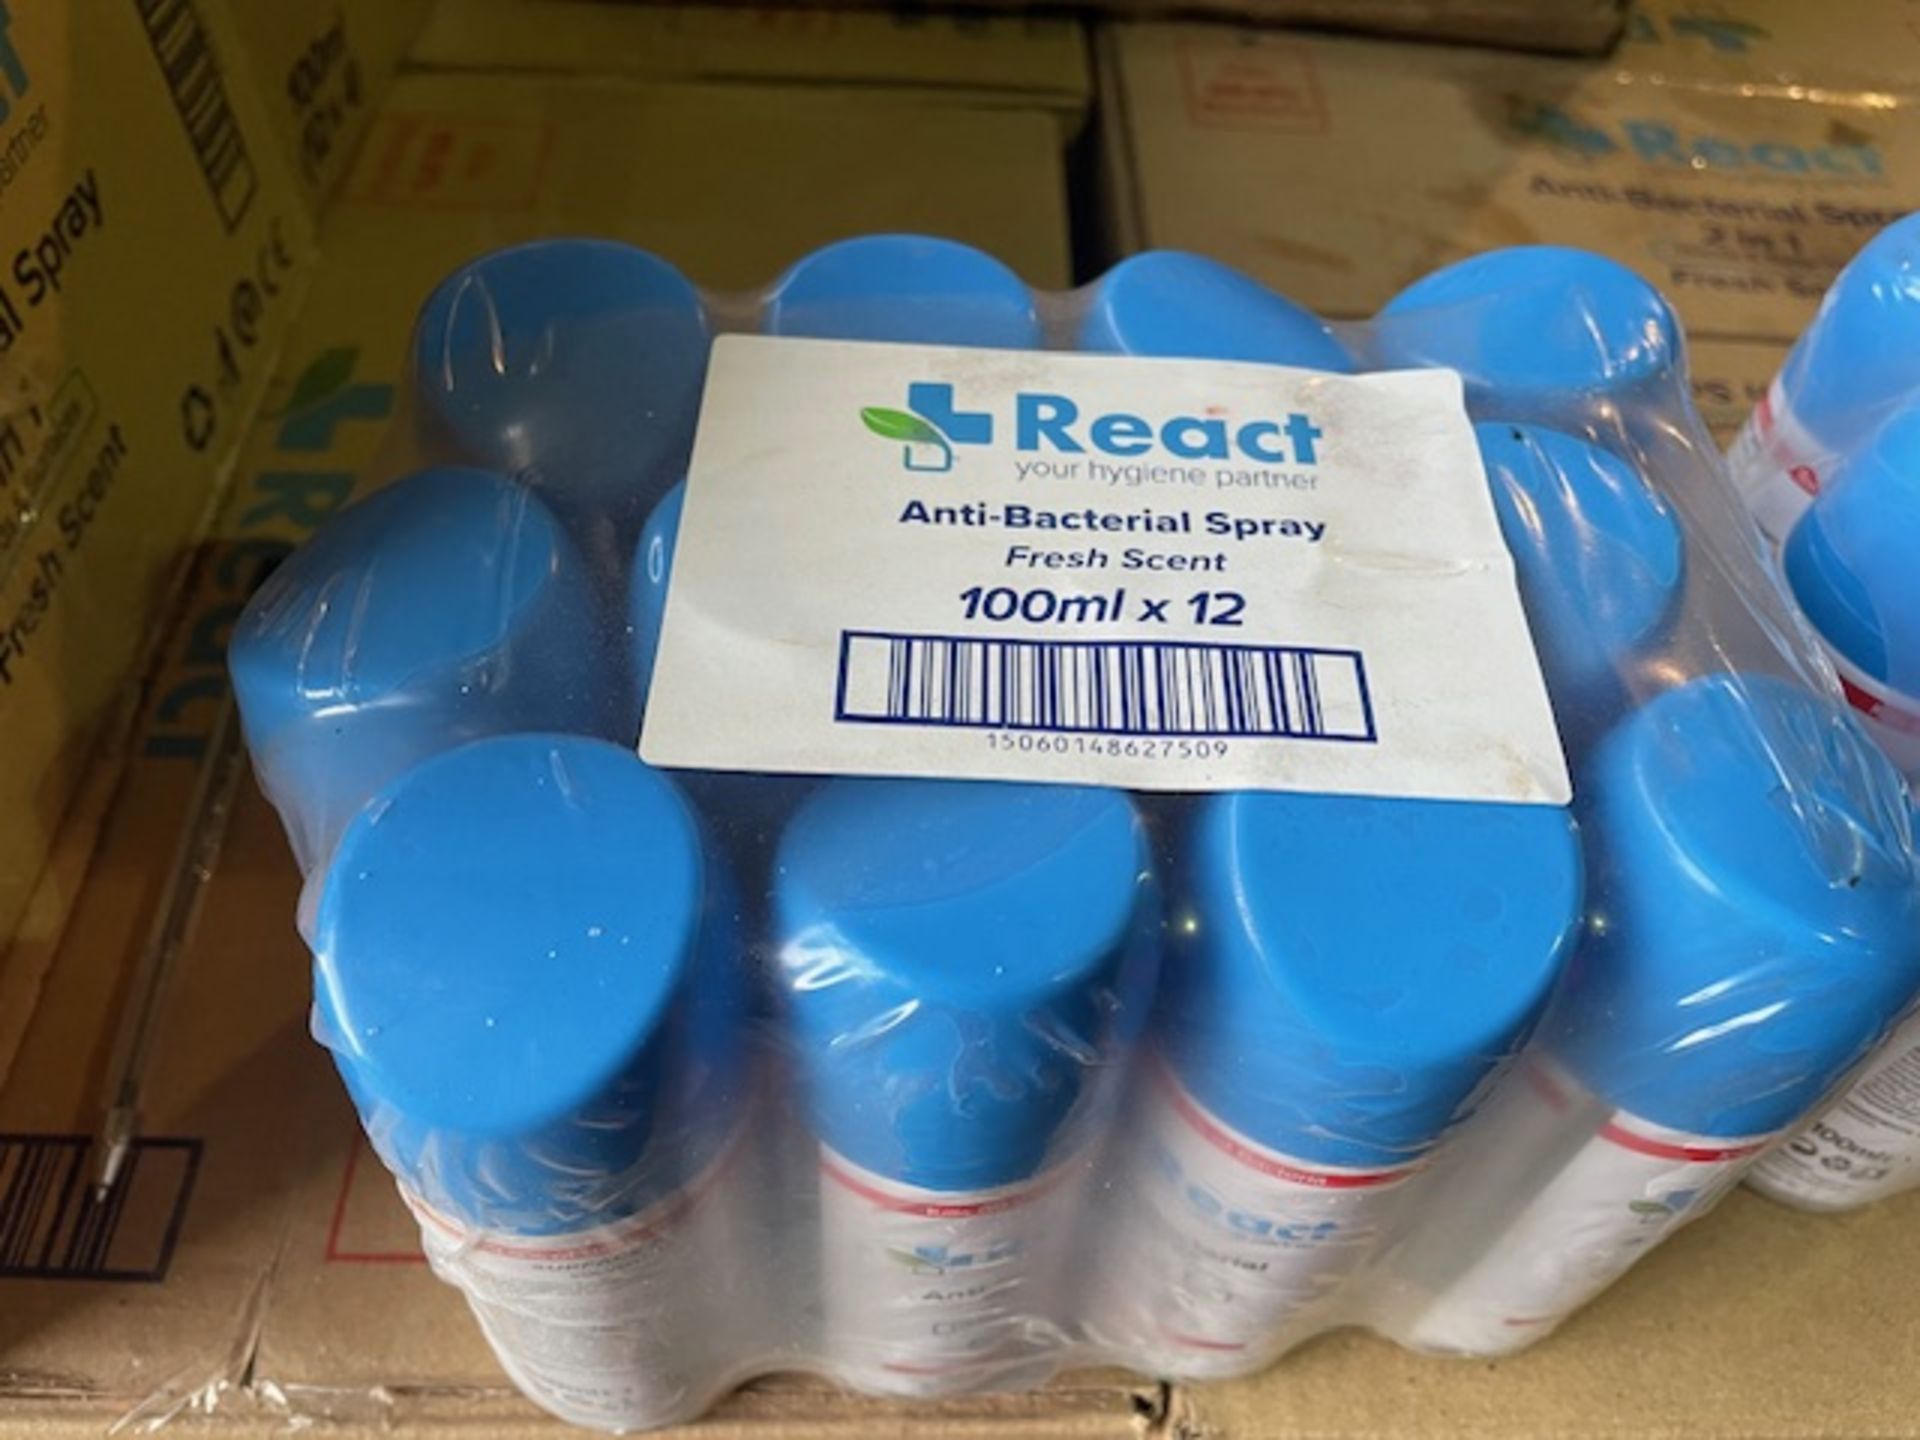 3264 CANS OF REACT ANTI-BACTERIAL SPRAY IN BOXES OF 48 SPRAY CANS ON PALLET INCLUDED - Image 2 of 4